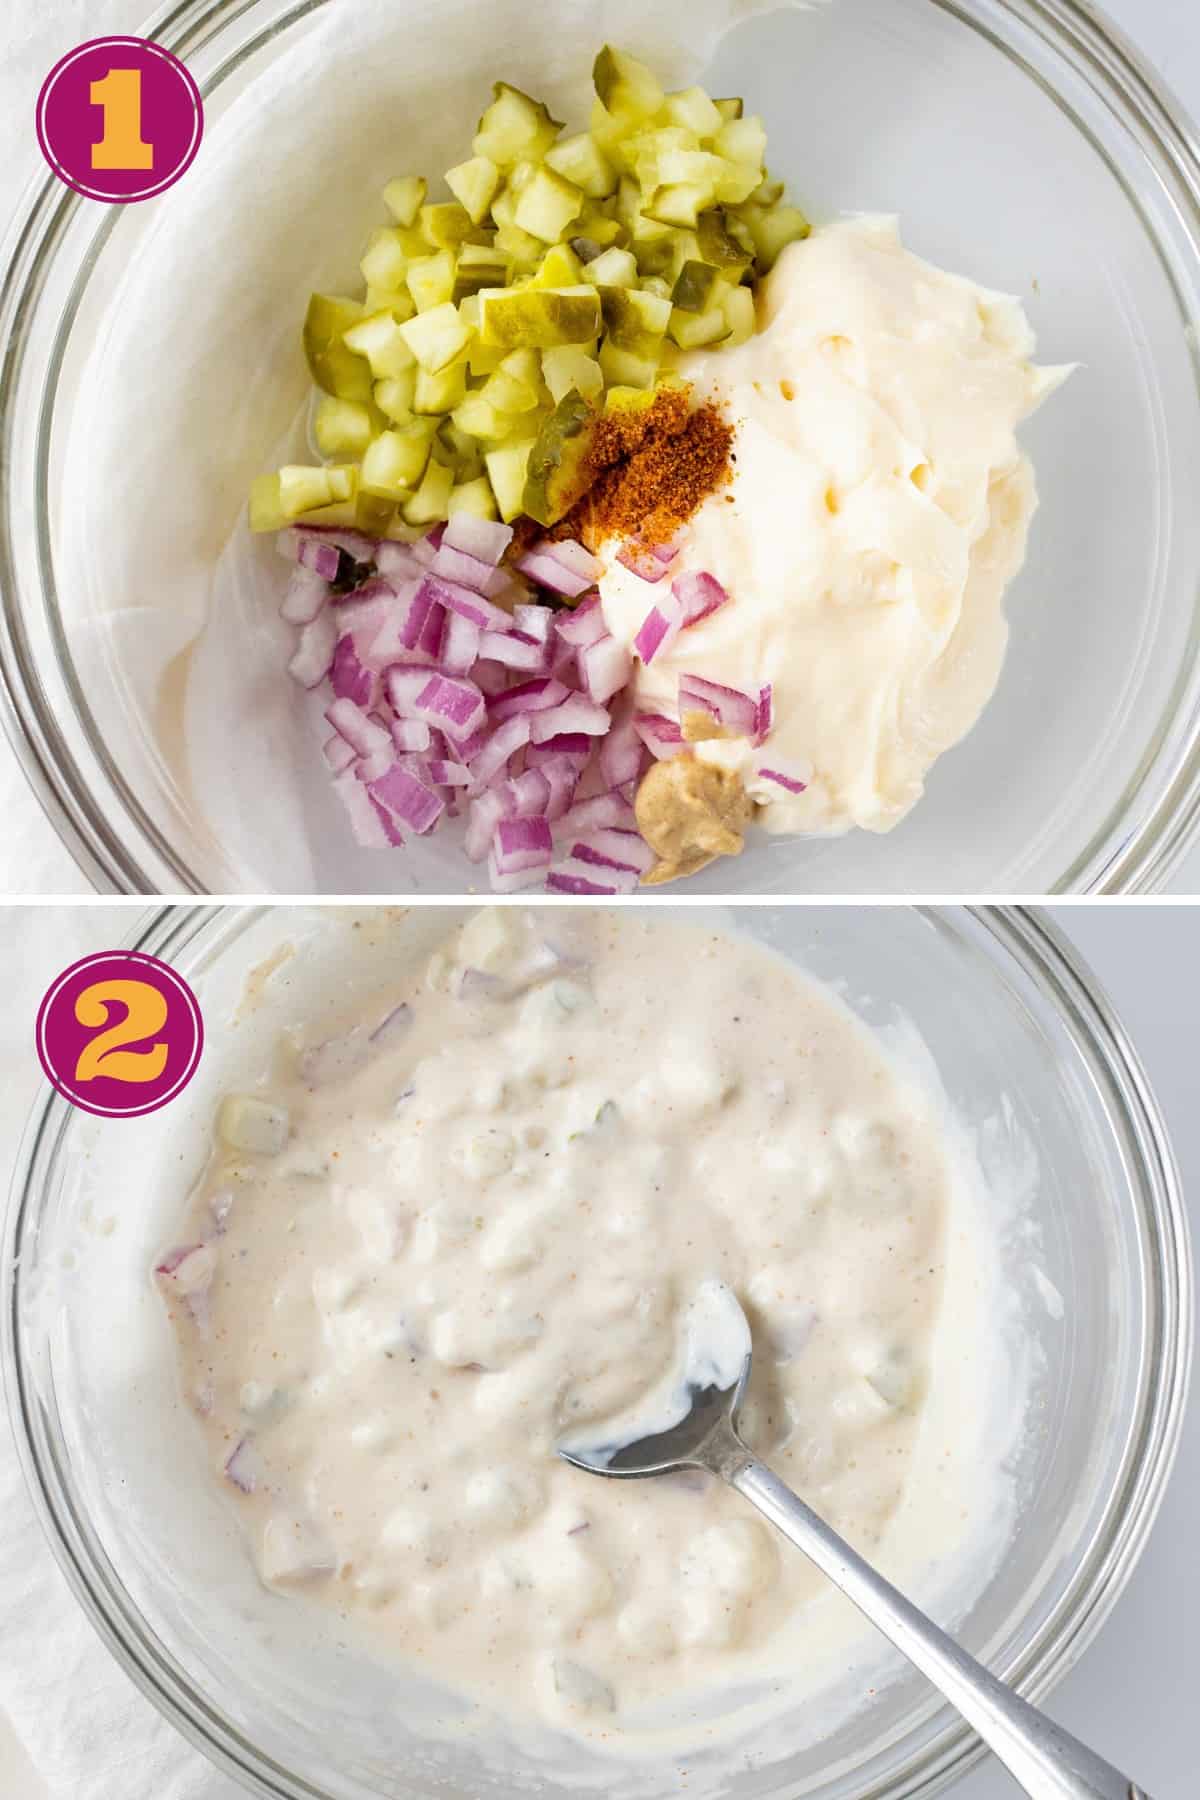 step-by-step instructions for how to make tartar sauce keto by adding all the ingredients in a mixing bowl and mixing until the homemade tartar sauce ingredients are incorporated